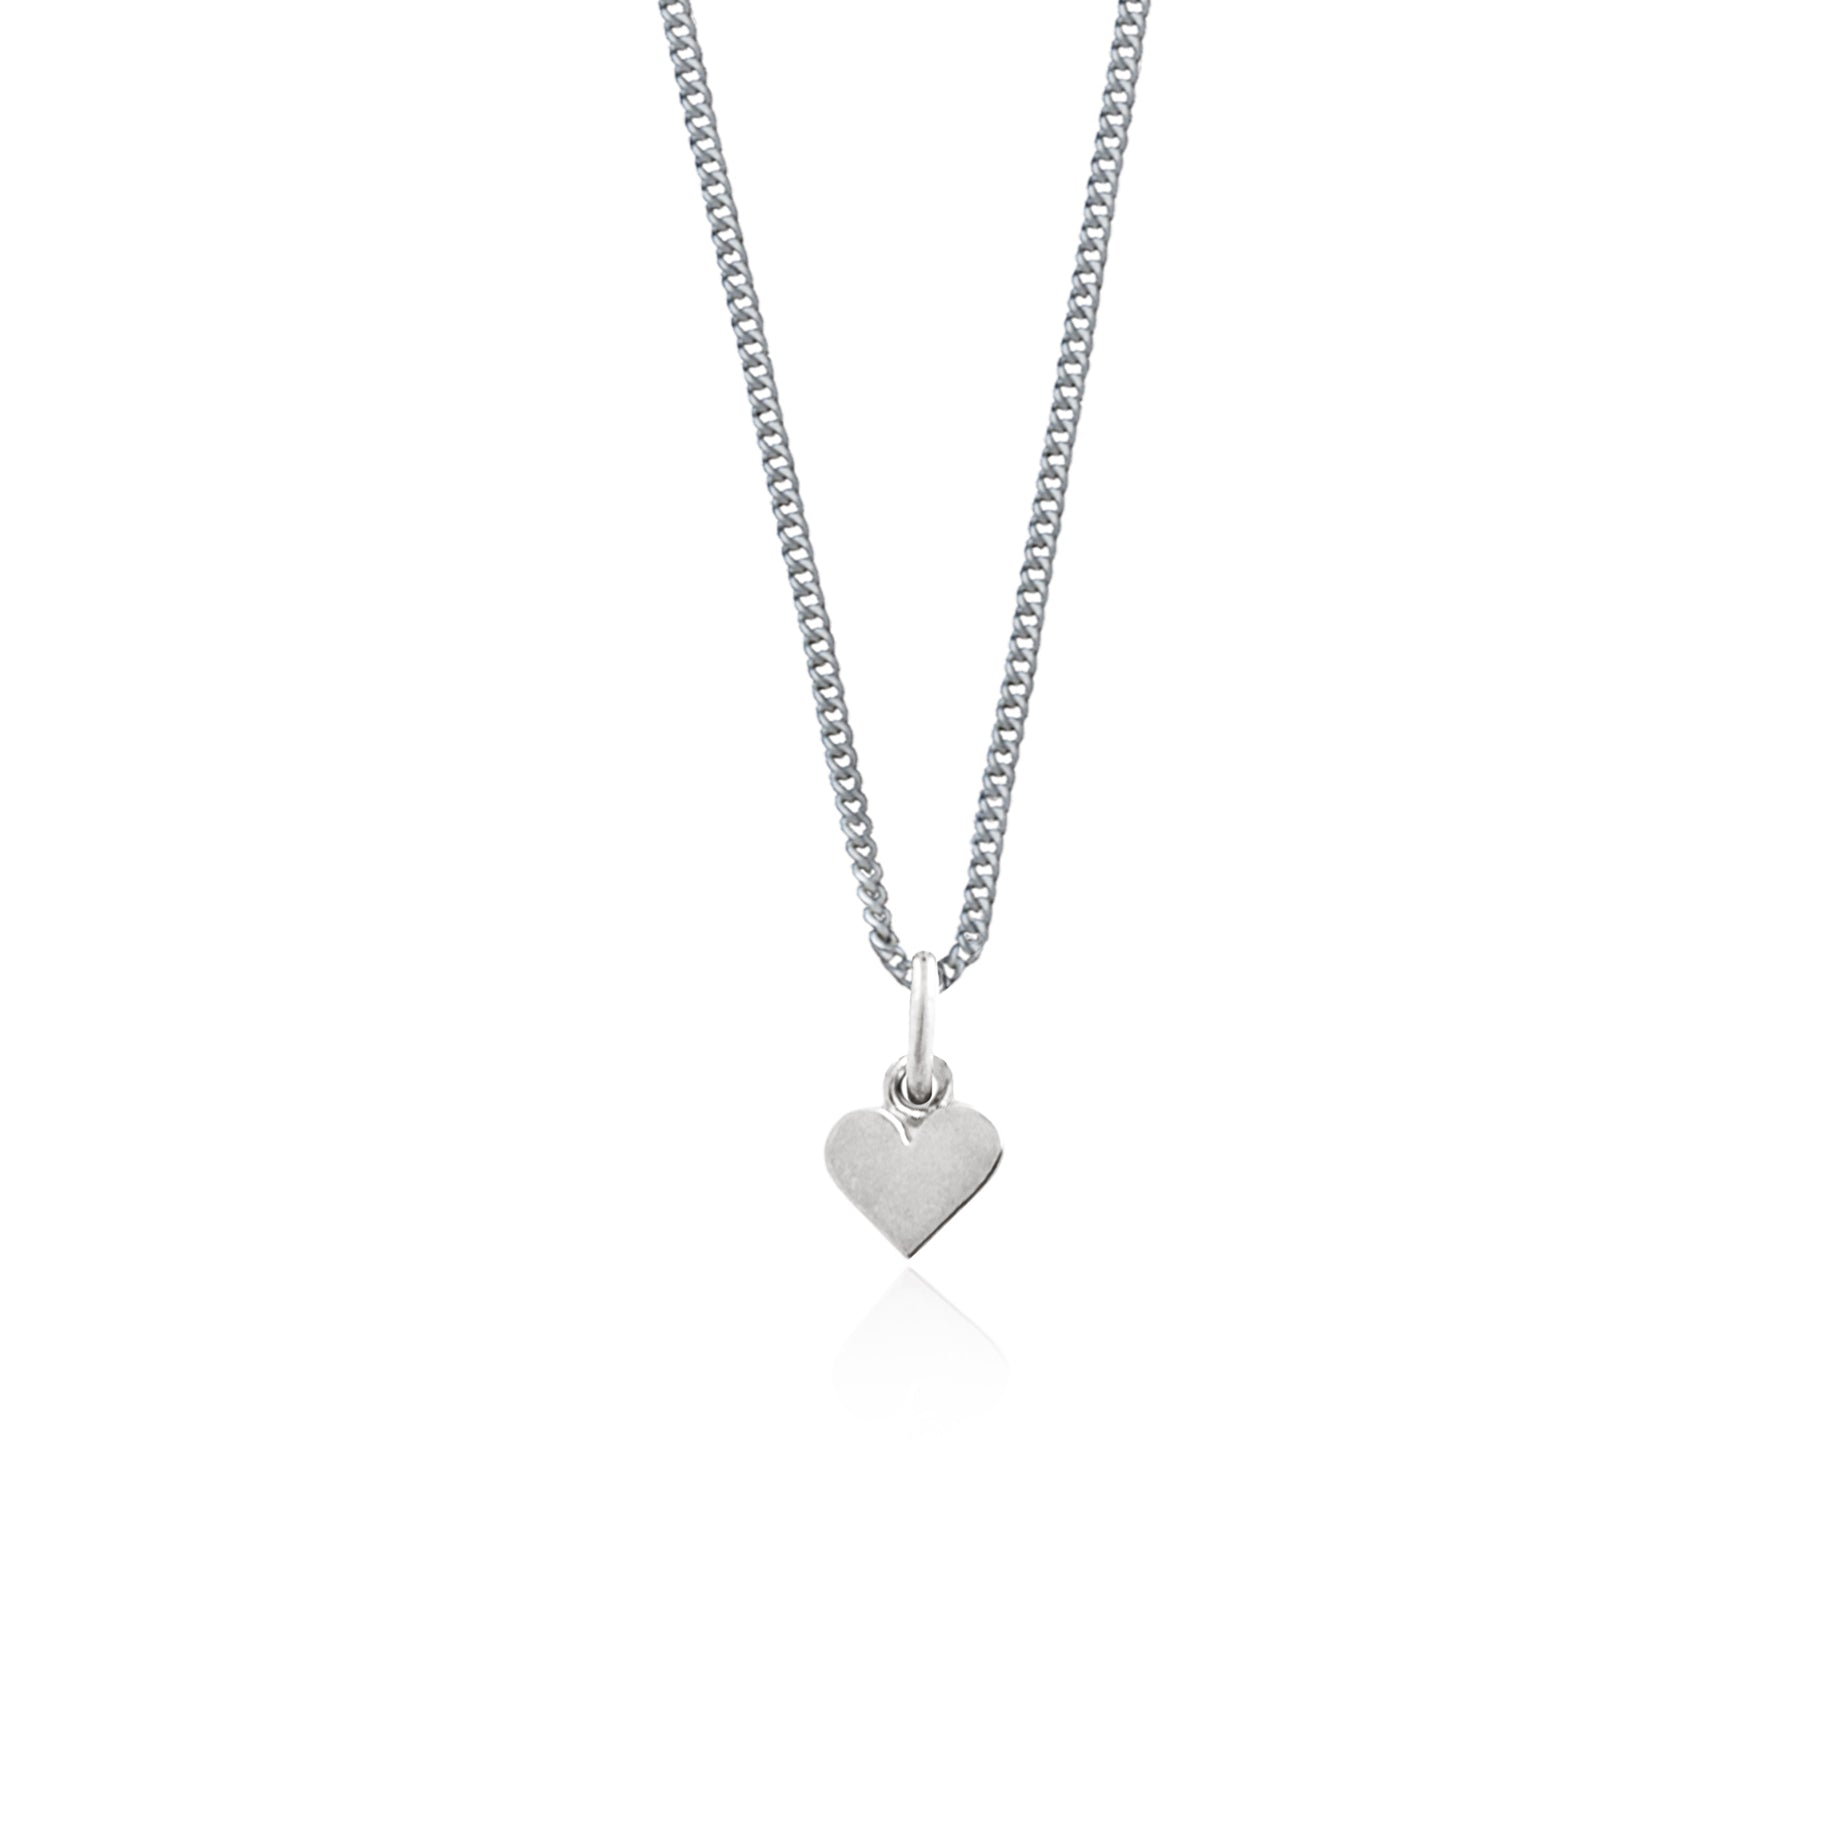 Single Heart of Gold Necklace made from Solid Silver Heart Charm